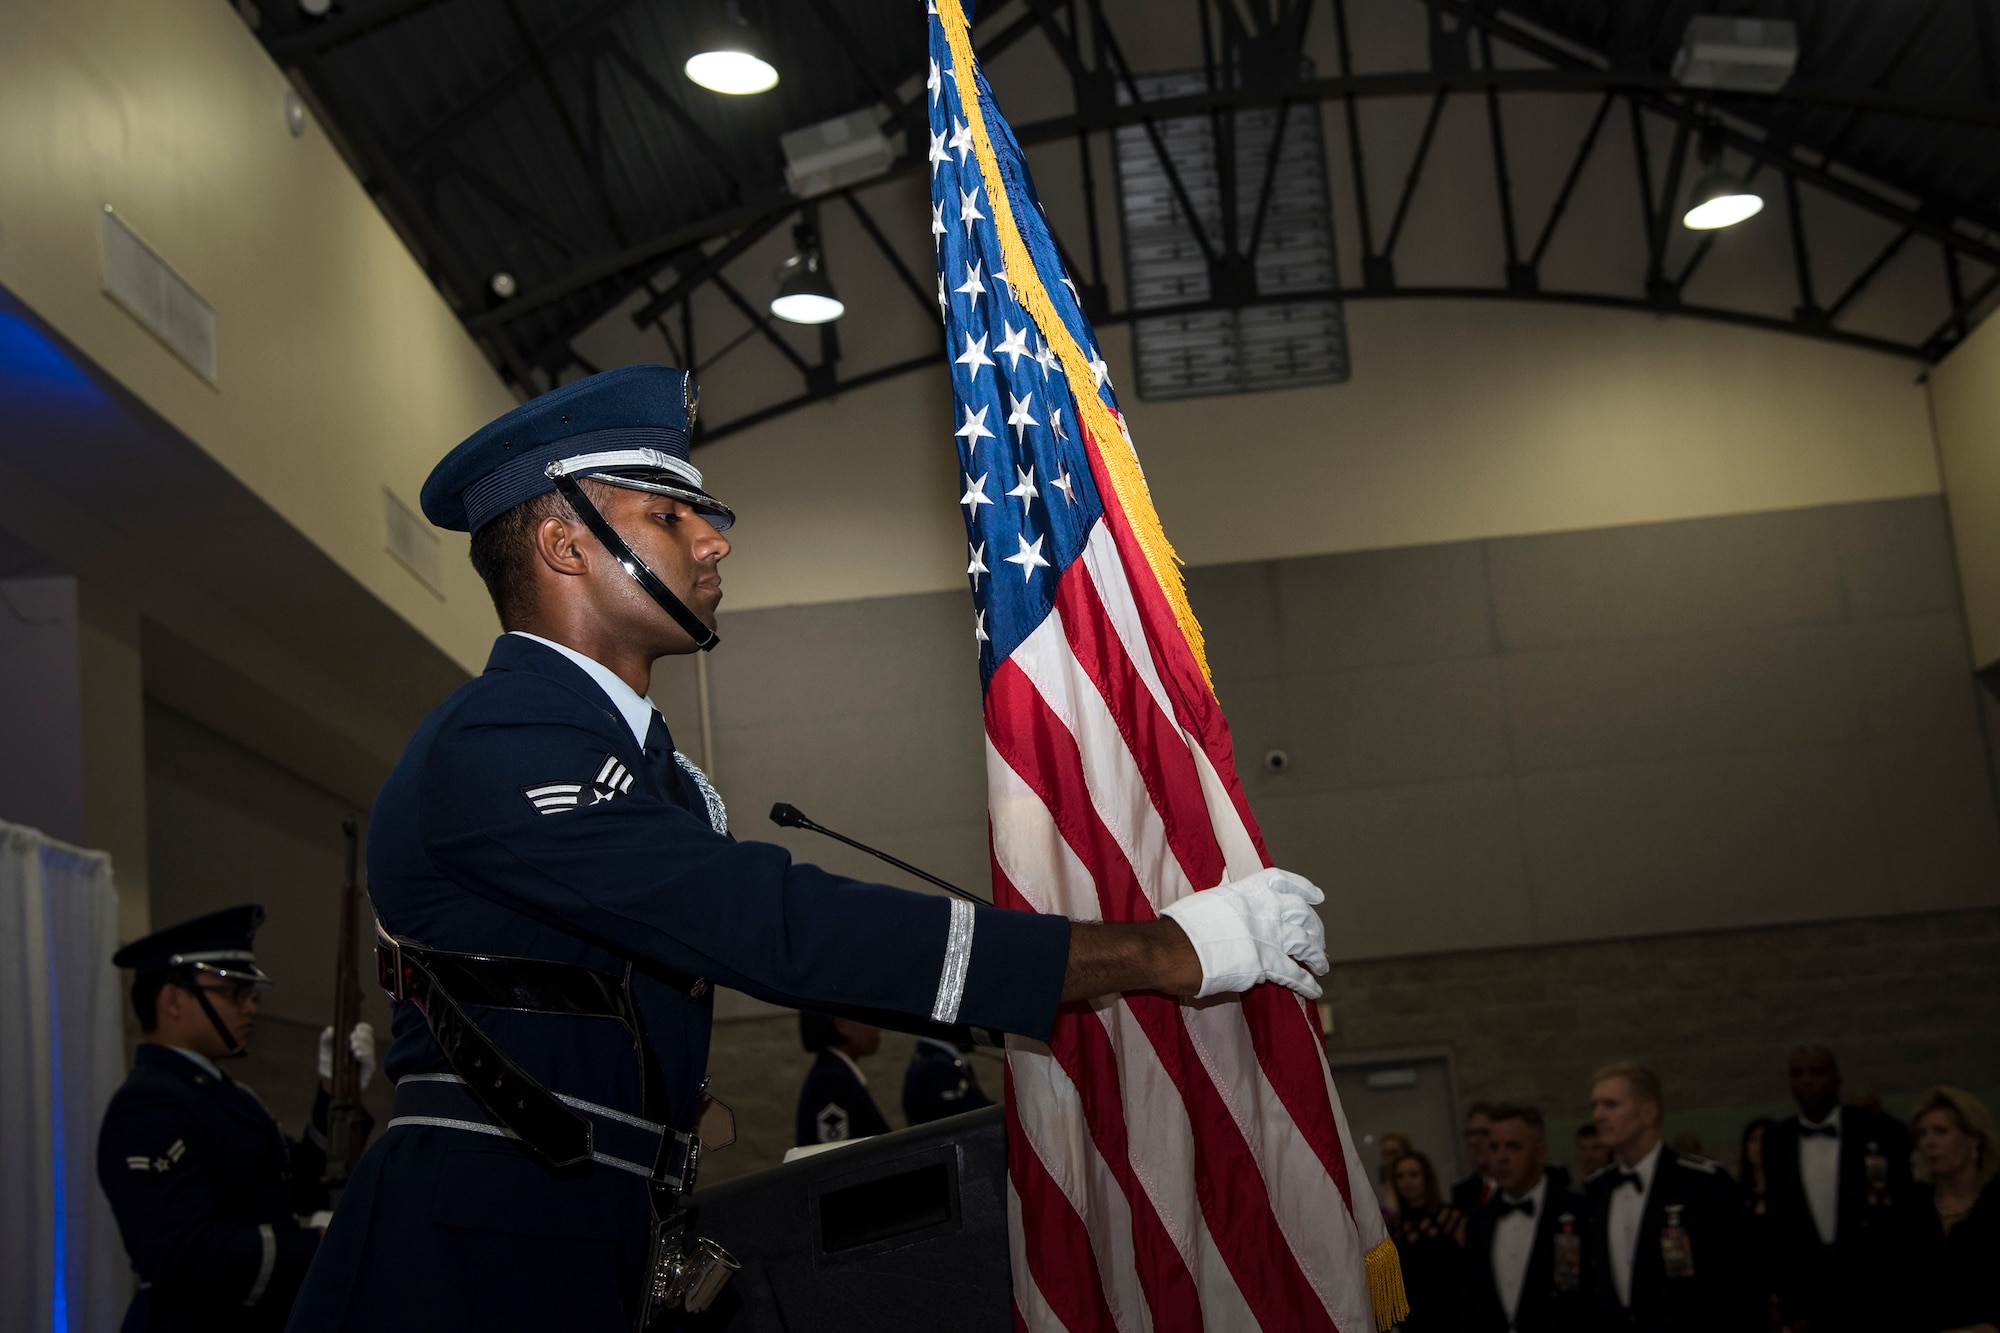 An Airman from Moody’s Honor Guard presents the colors during a Senior NCO Induction ceremony, July 27, 2018, in Valdosta, Ga. The ceremony honored Moody’s upcoming and newest Senior NCOs as they join the ranks of the highest enlisted tier. Senior NCOs lead and manage teams, provide guidance to leadership, translate leaders’ decisions into specific tasks, and help Airmen internalize the Air Force core values. (U.S. Air Force photo by Airman 1st Class Eugene Oliver)